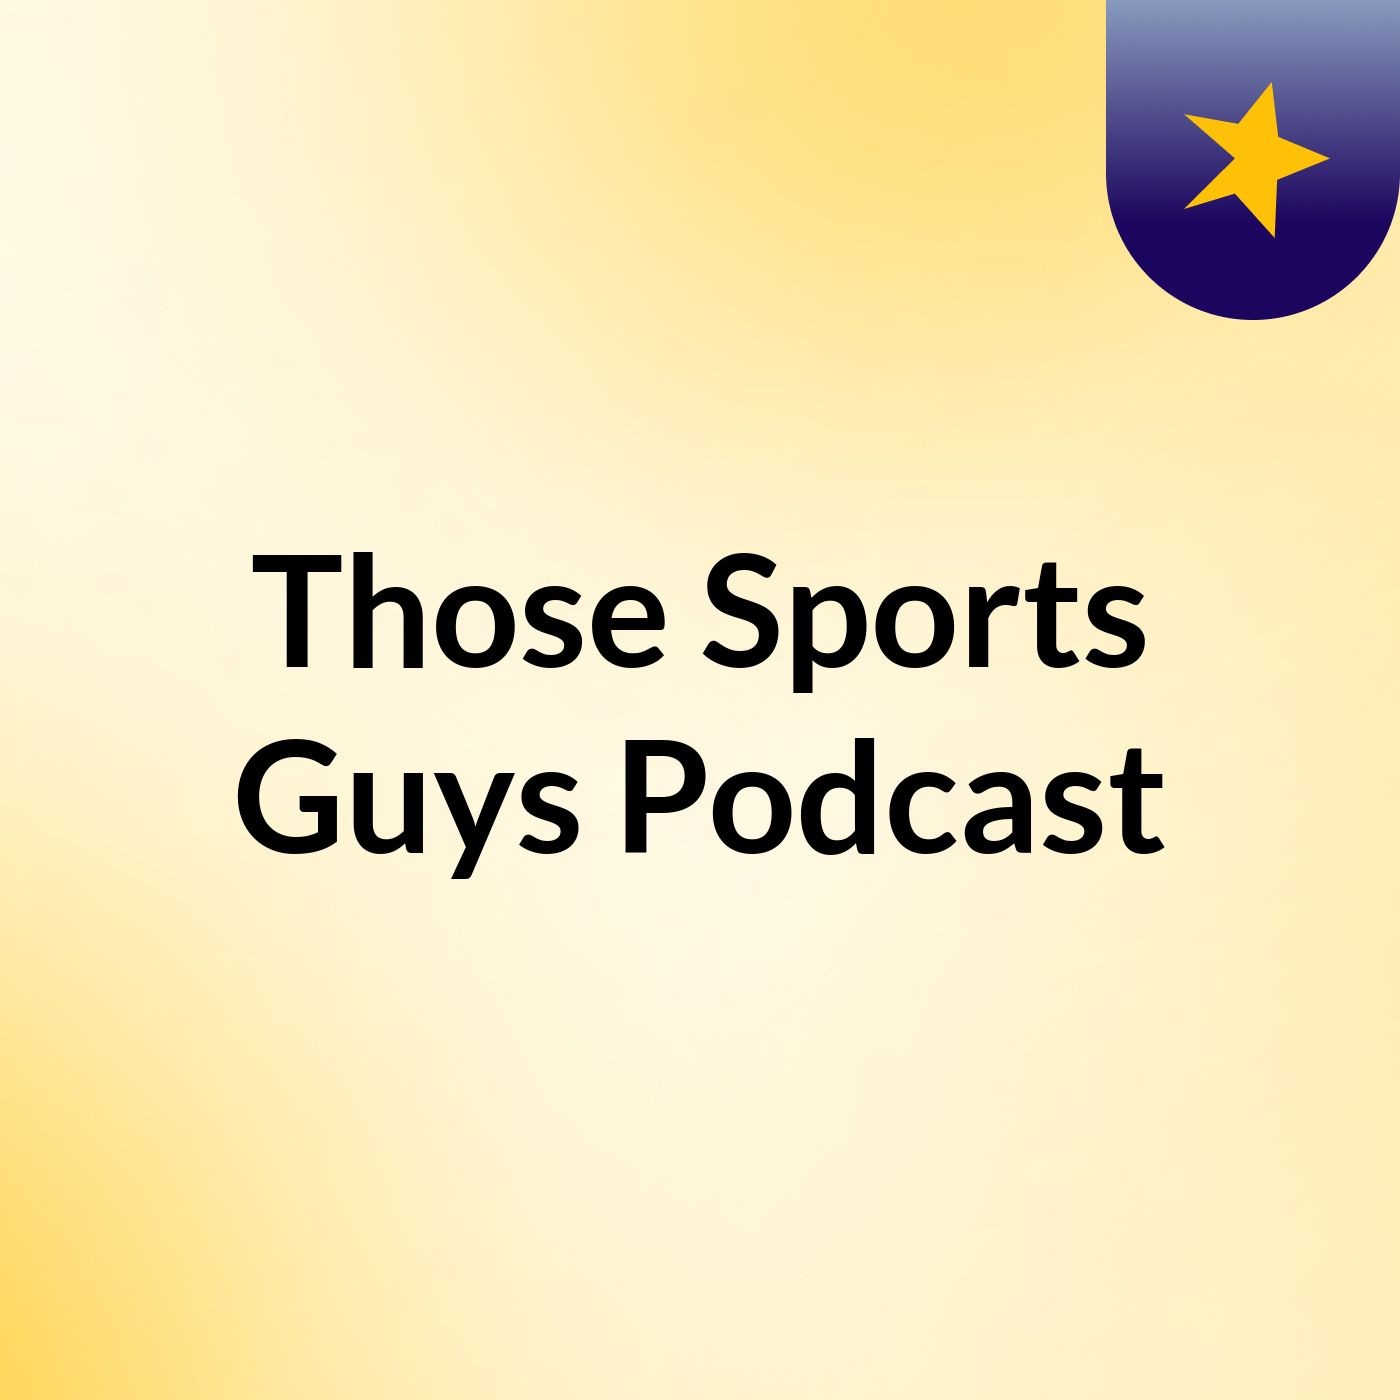 Podcast #7: Those Sports Guys 8/1